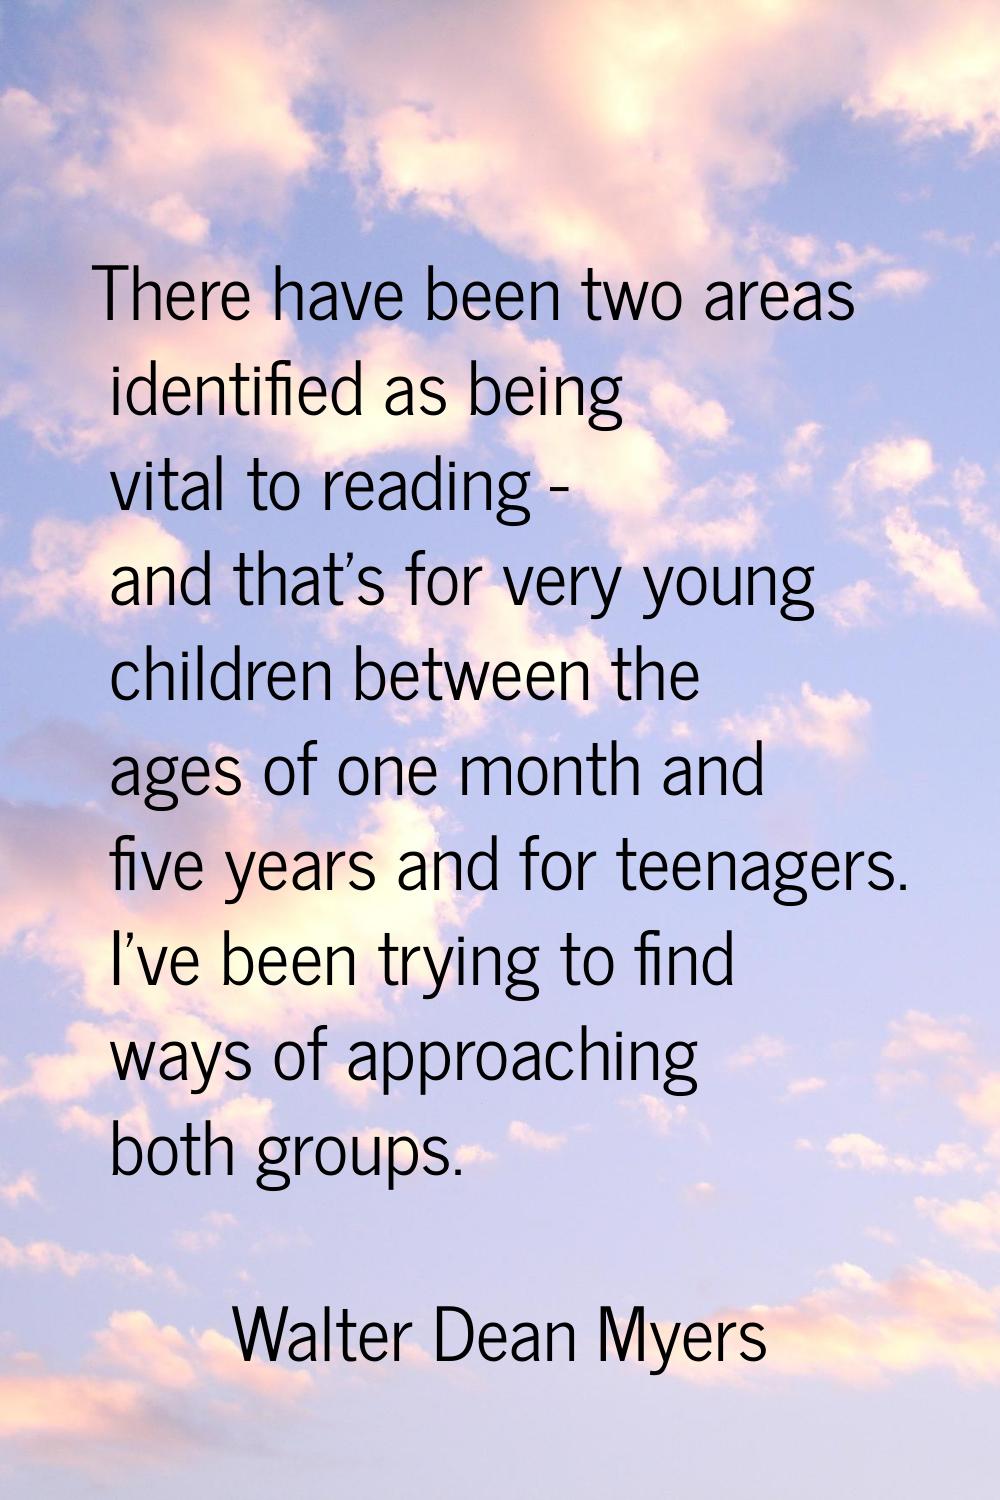 There have been two areas identified as being vital to reading - and that's for very young children